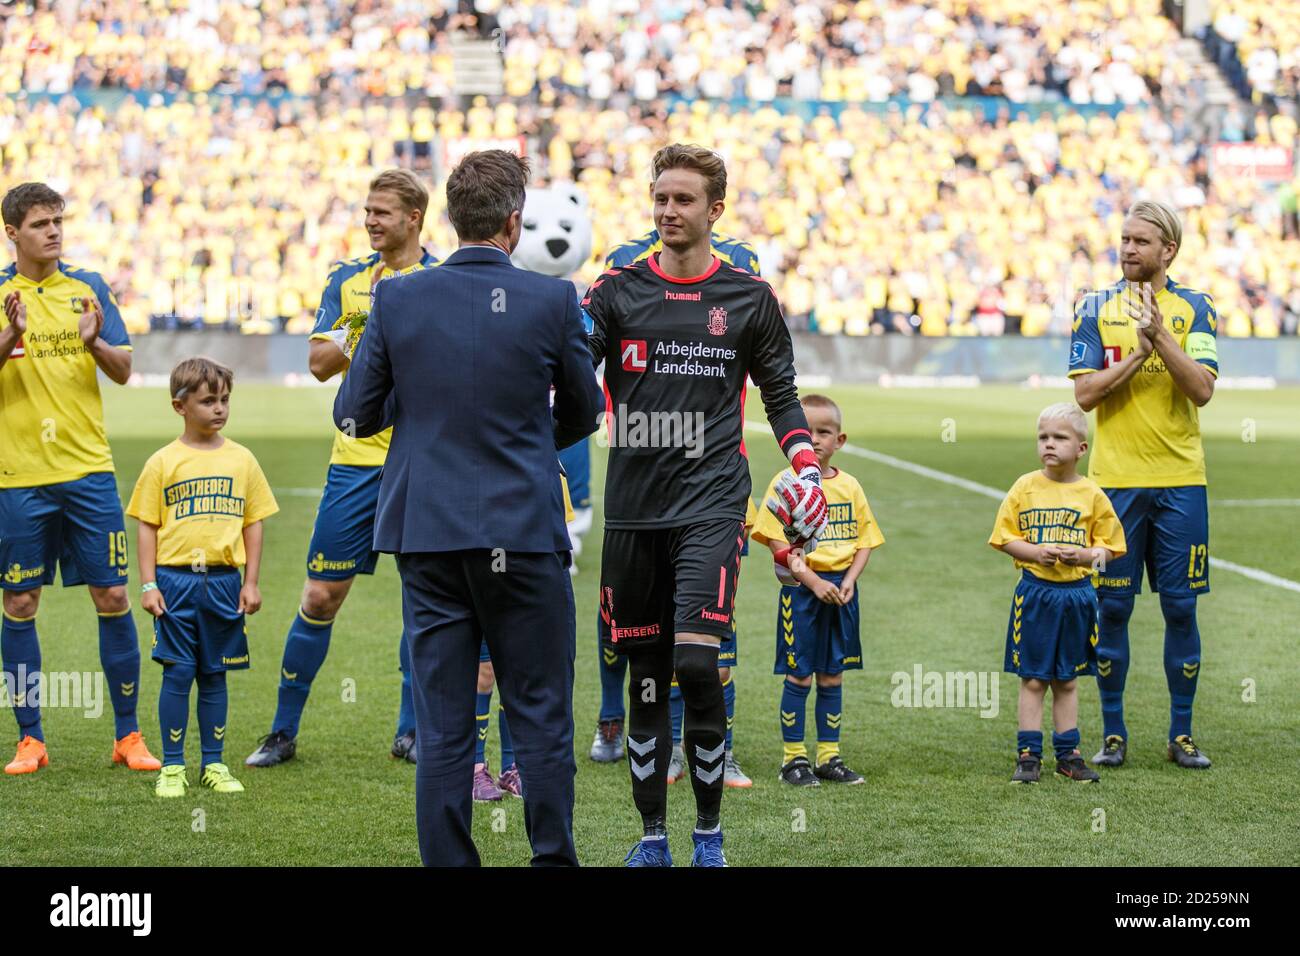 Brondby, Denmark. 21st, May 2018. Goalkeeper Frederik Ronnow (1) of Broendby IF seen during the 3F Superliga match between Broendby IF and AAB at Brondby Stadium. (Photo credit: Gonzales Photo - Thomas Rasmussen). Stock Photo